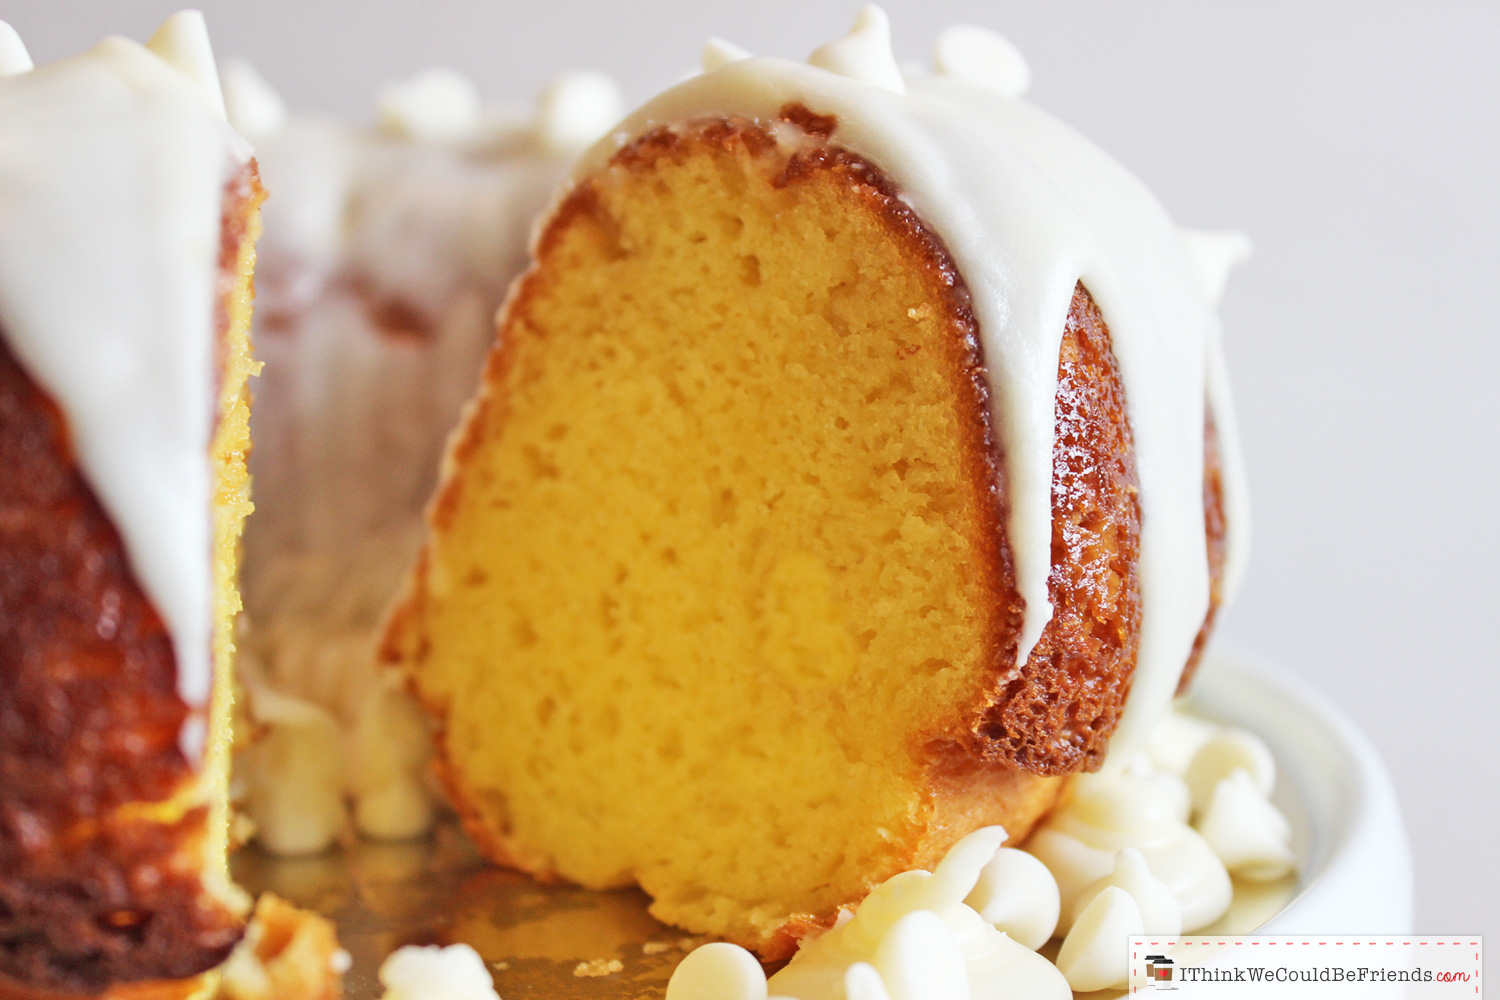 This the BEST & EASIEST White Chocolate Vanilla Bundt Cake recipe that you'll ever try! It starts with a yellow boxed cake mix, BUT then you add sour cream and a pudding mix, it looks FANCY and tastes MOIST and INCREDIBLE! Your guests will rave and will ask for the recipe (so bring copies!) #white #chocolate #vanilla #bundt #cake #recipe #mix #yellow #best #easy #quick #moist